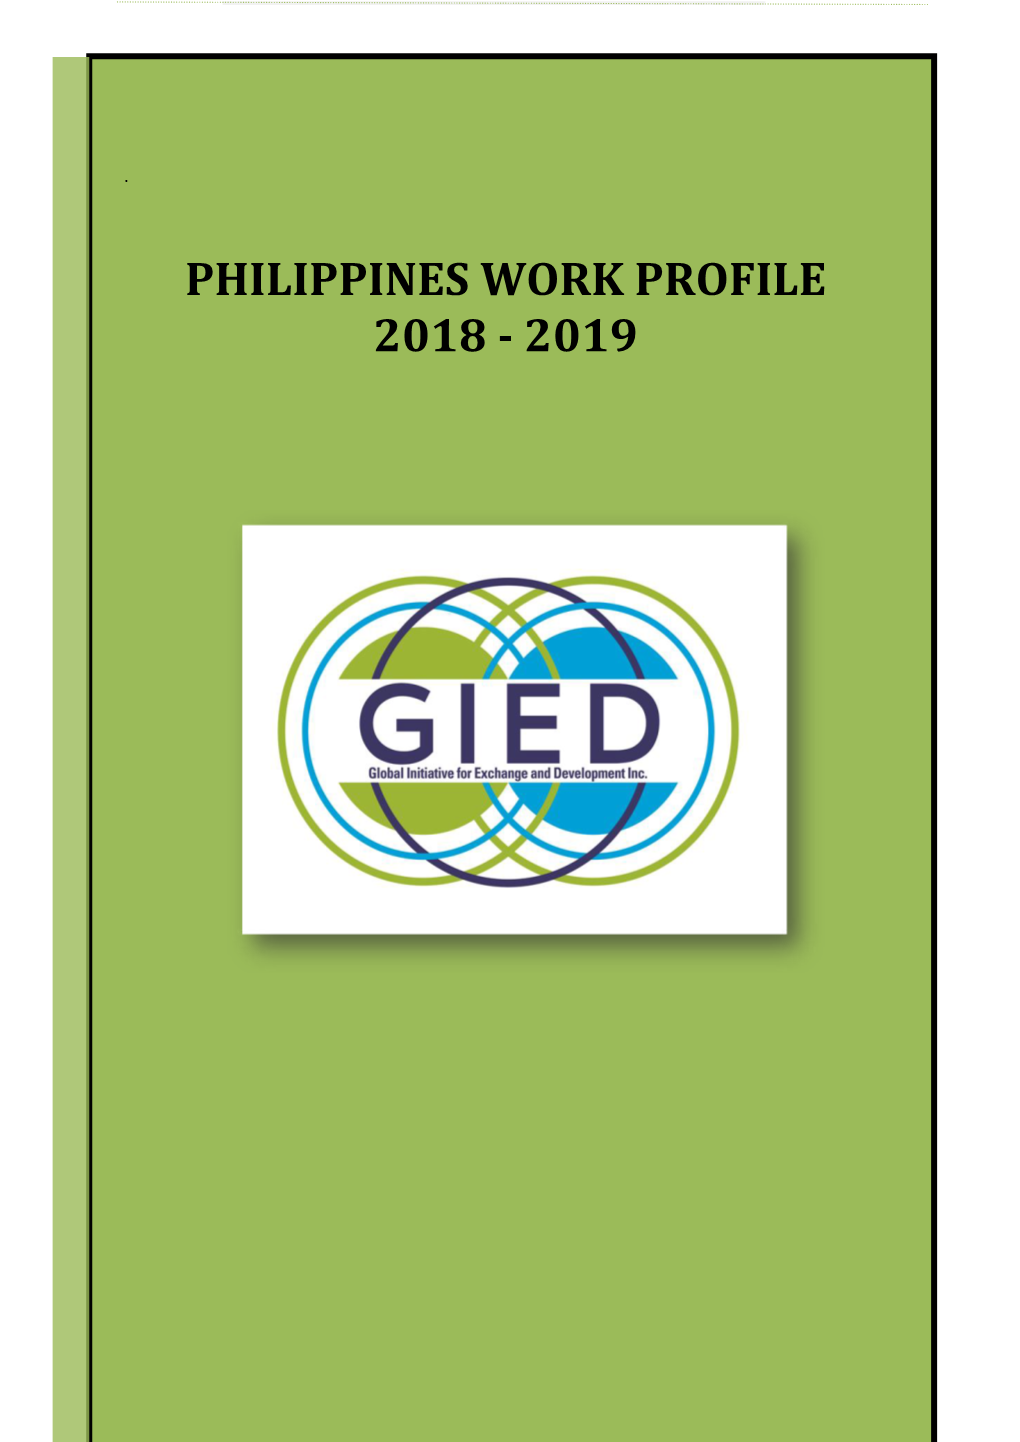 Global Initiative for Exchange and Development Inc. (GIED) Is a Non-Profit and Non-Government Organization Established Last July 07, 2015 in Cebu City, Philippines